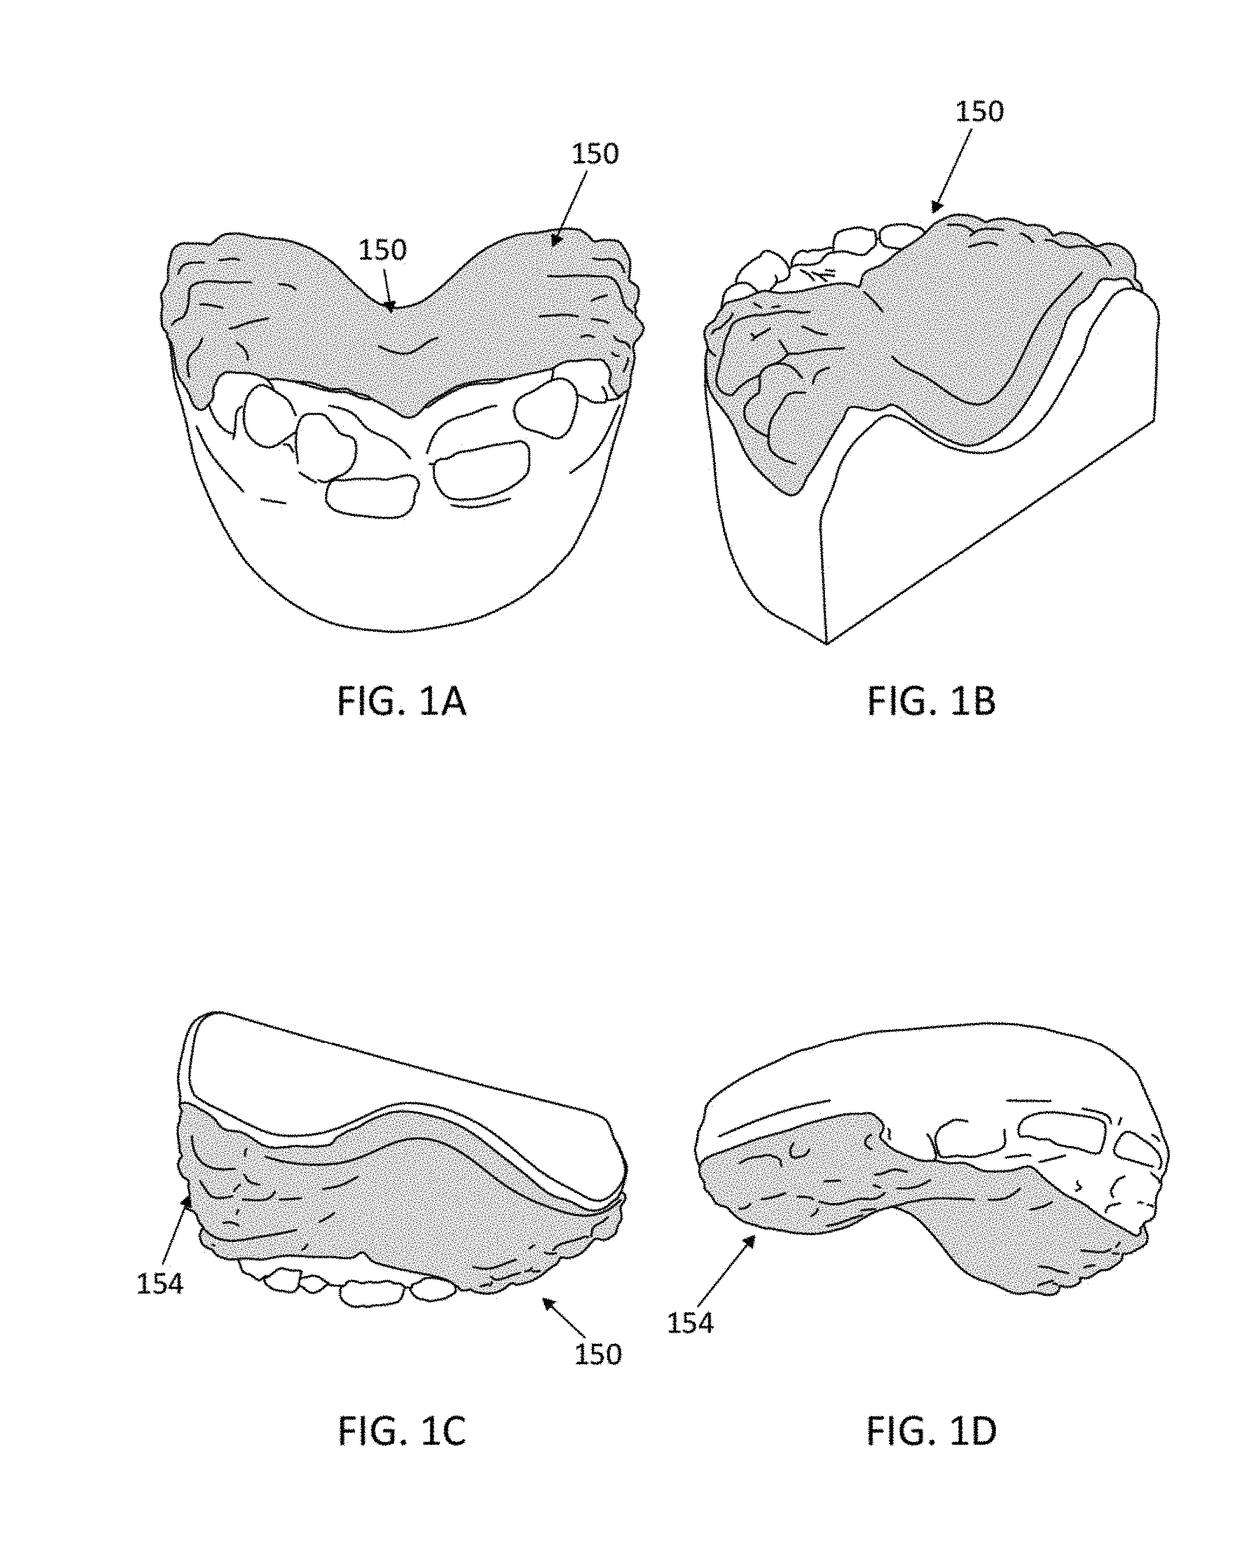 Palatal expanders and methods of expanding a palate